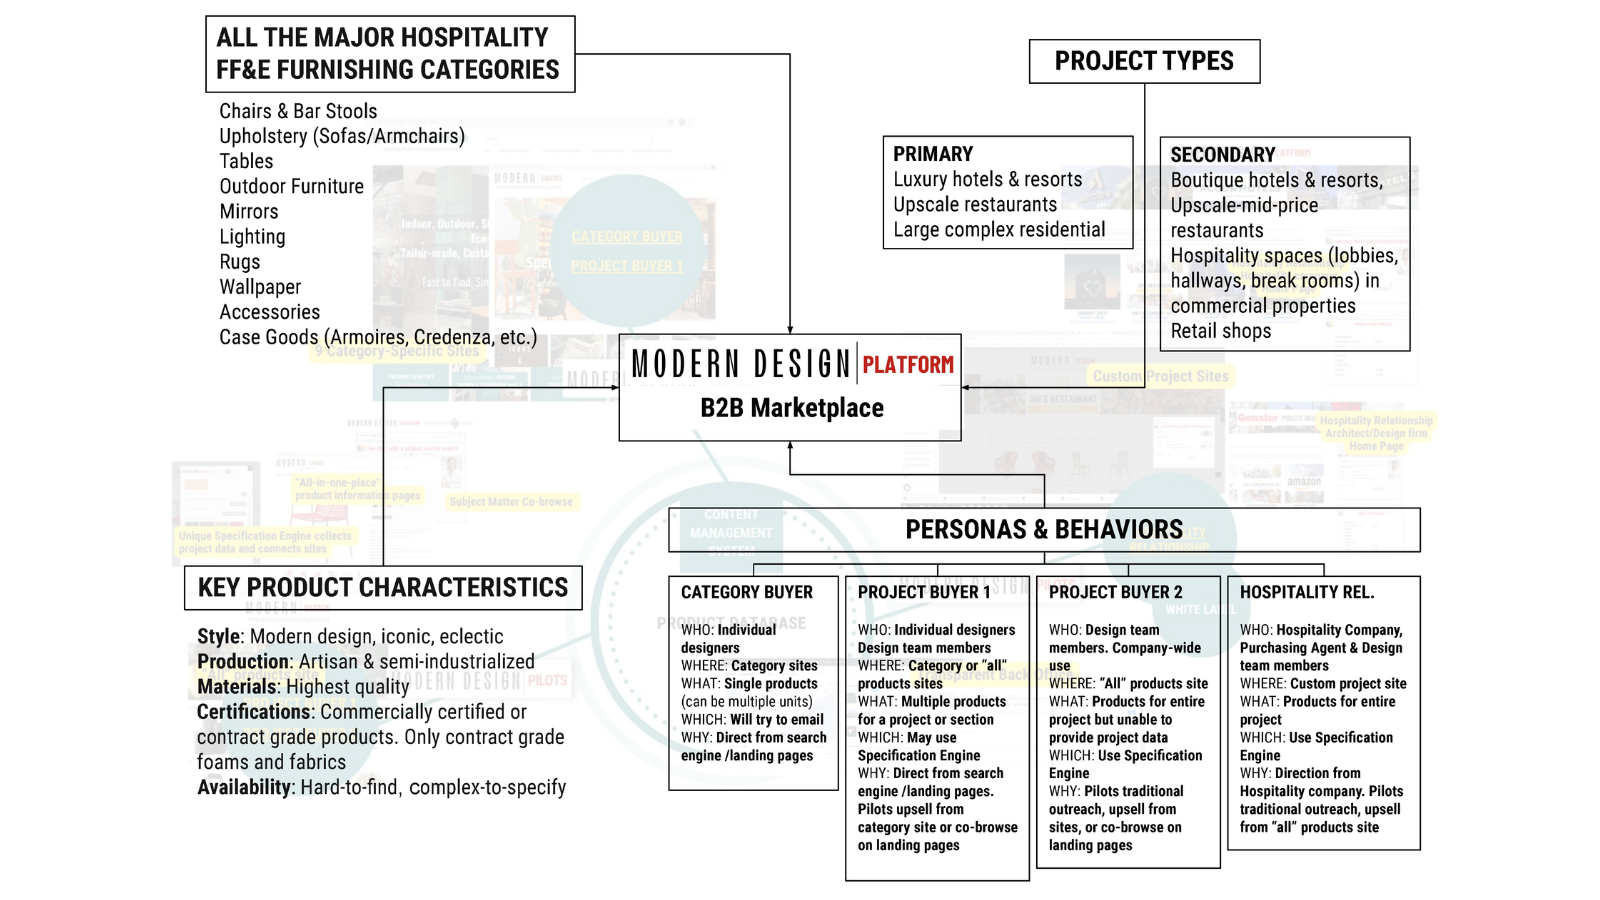 Projects, Products & Personas